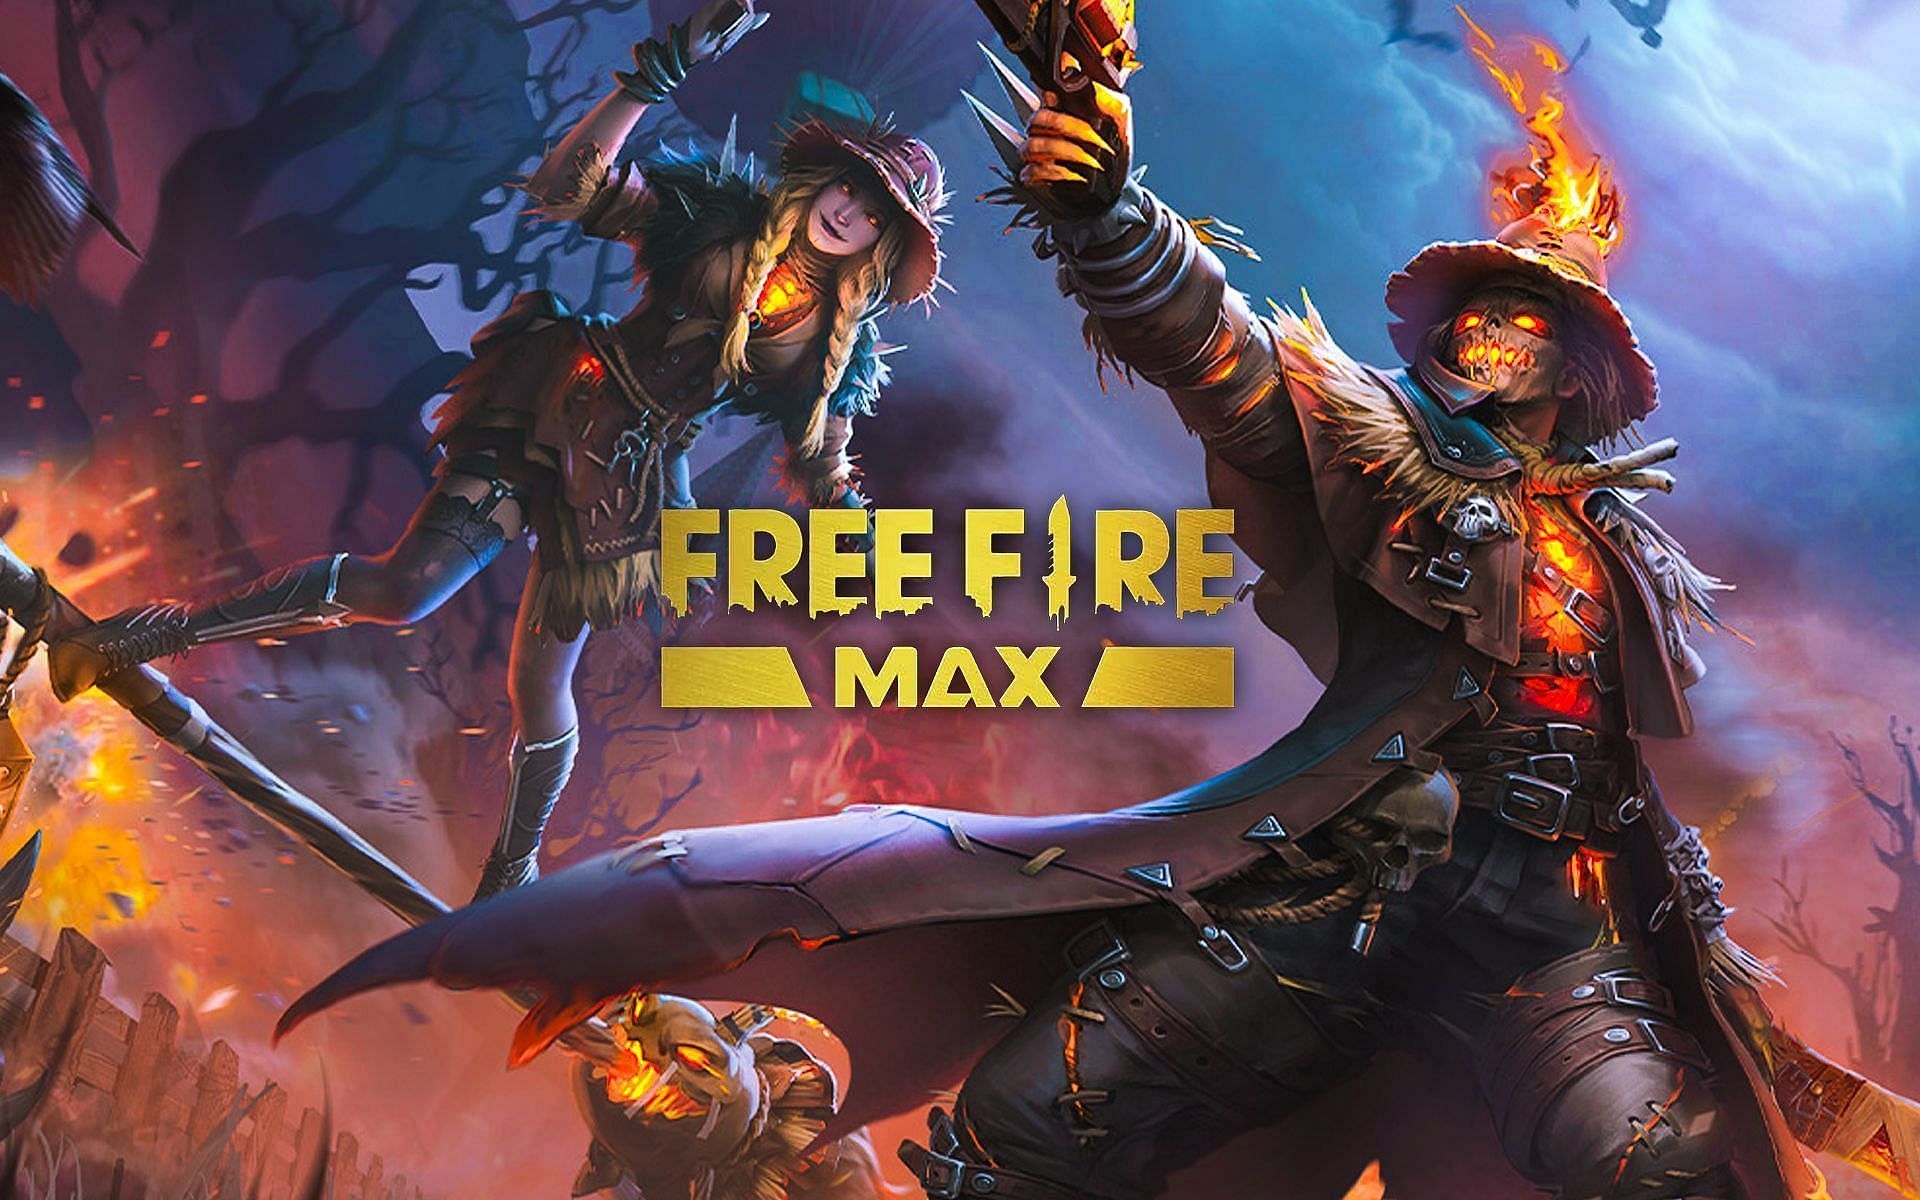 Free Fire MAX: How to Download the Game on iOS in India - MySmartPrice